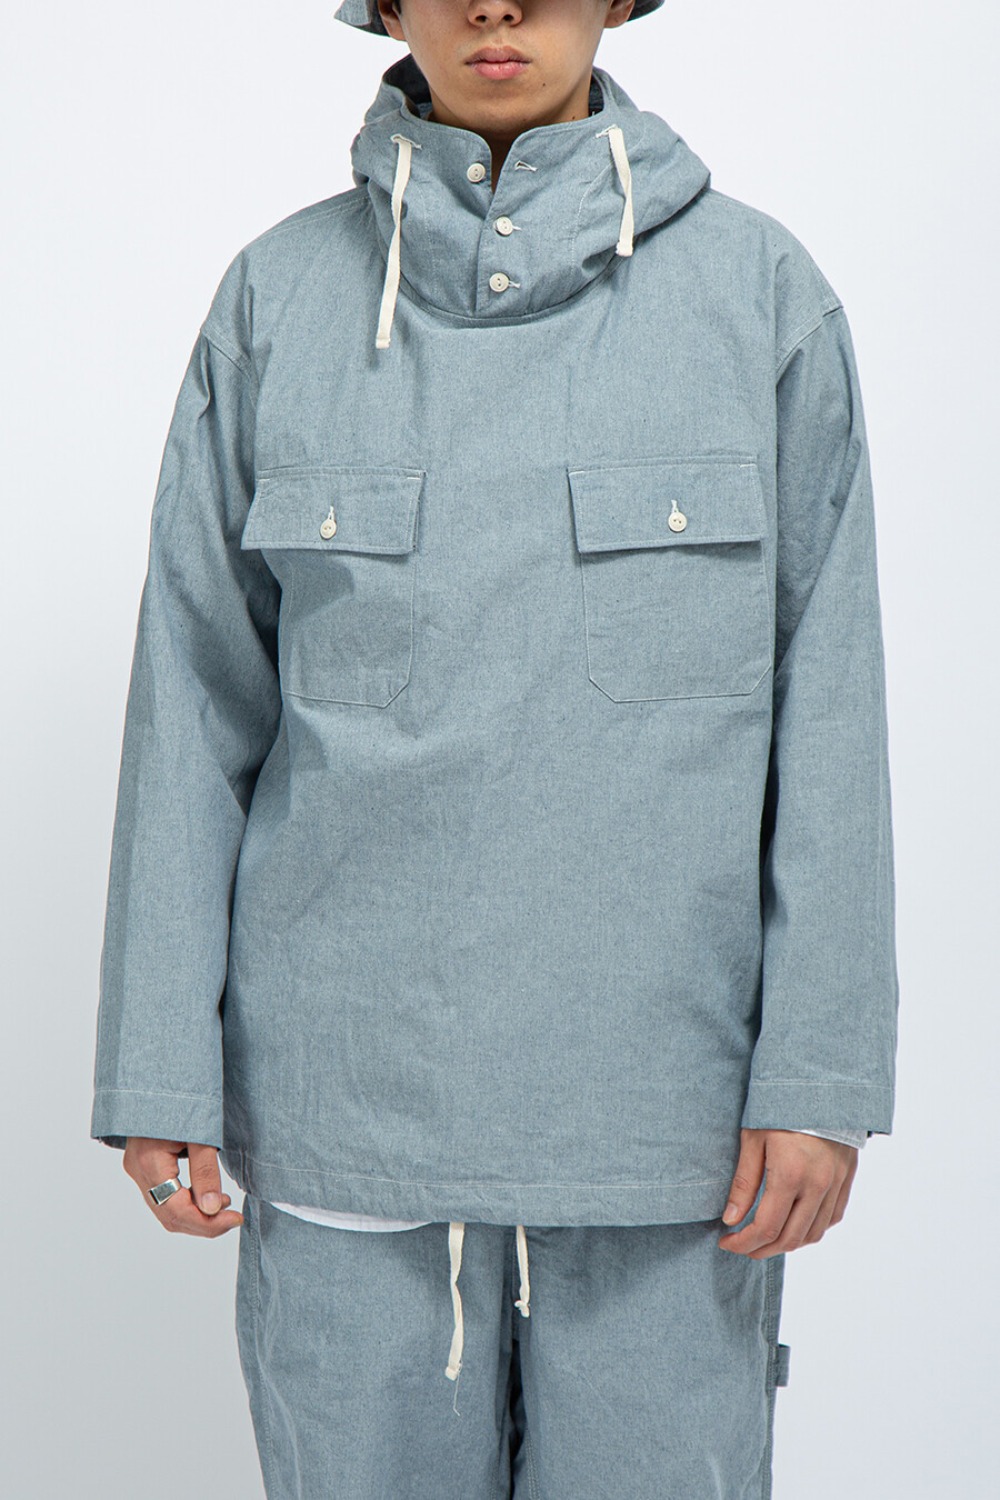 CAGOULE SHIRT BLUE UPCYCLED CHAMBRAY